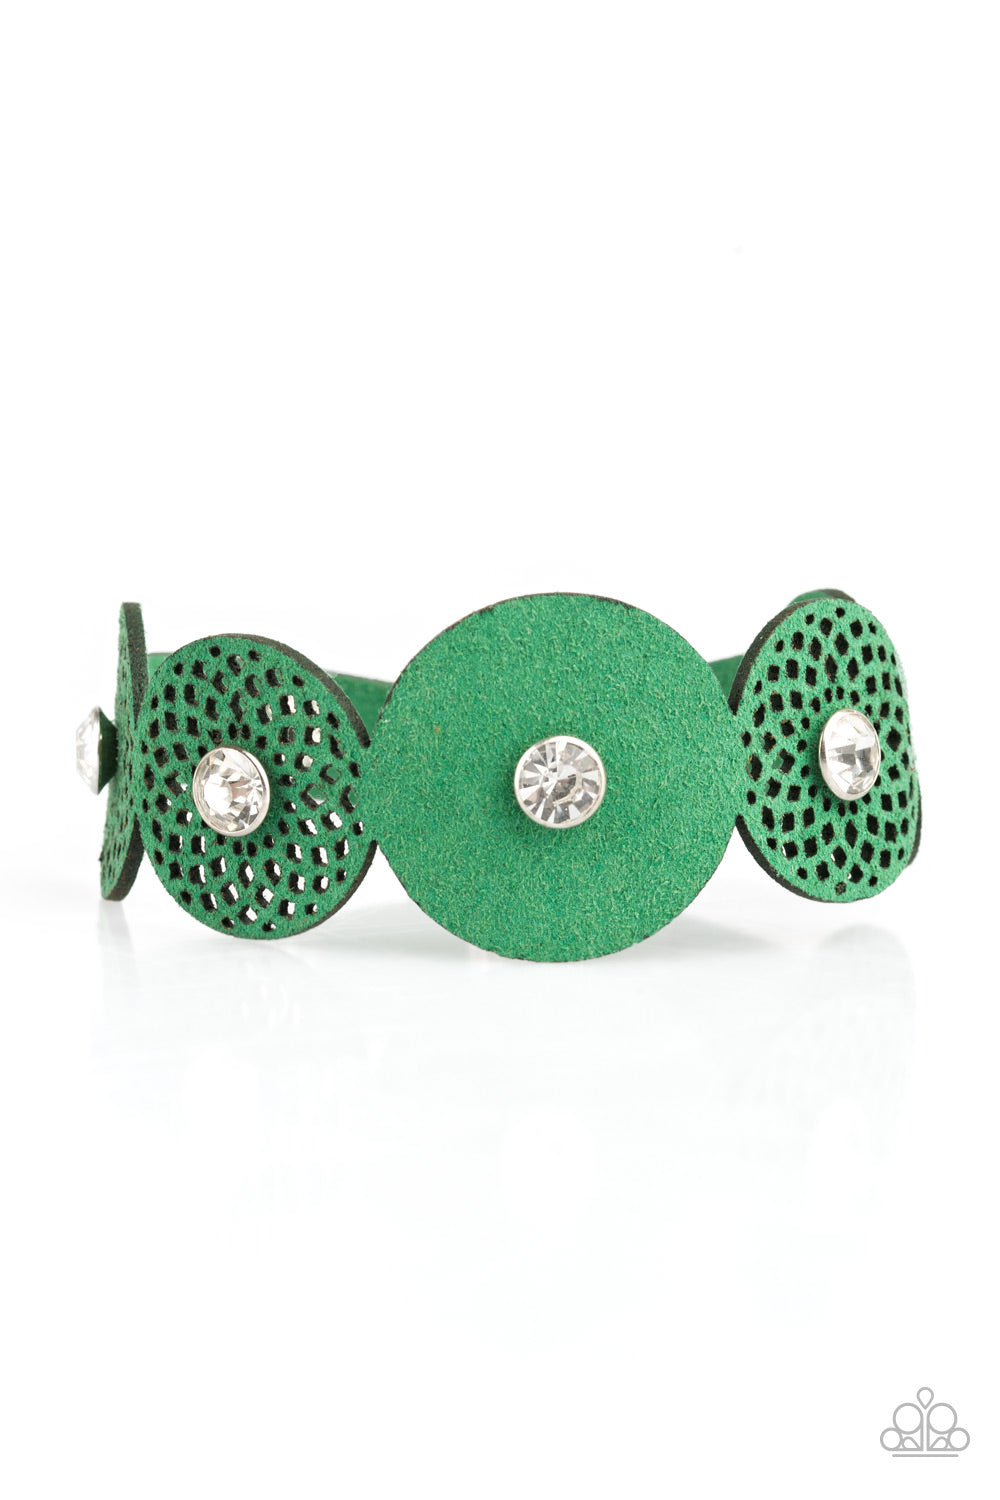 Paparazzi Accessories Poppin Popstar - Green Bracelets - Lady T Accessories